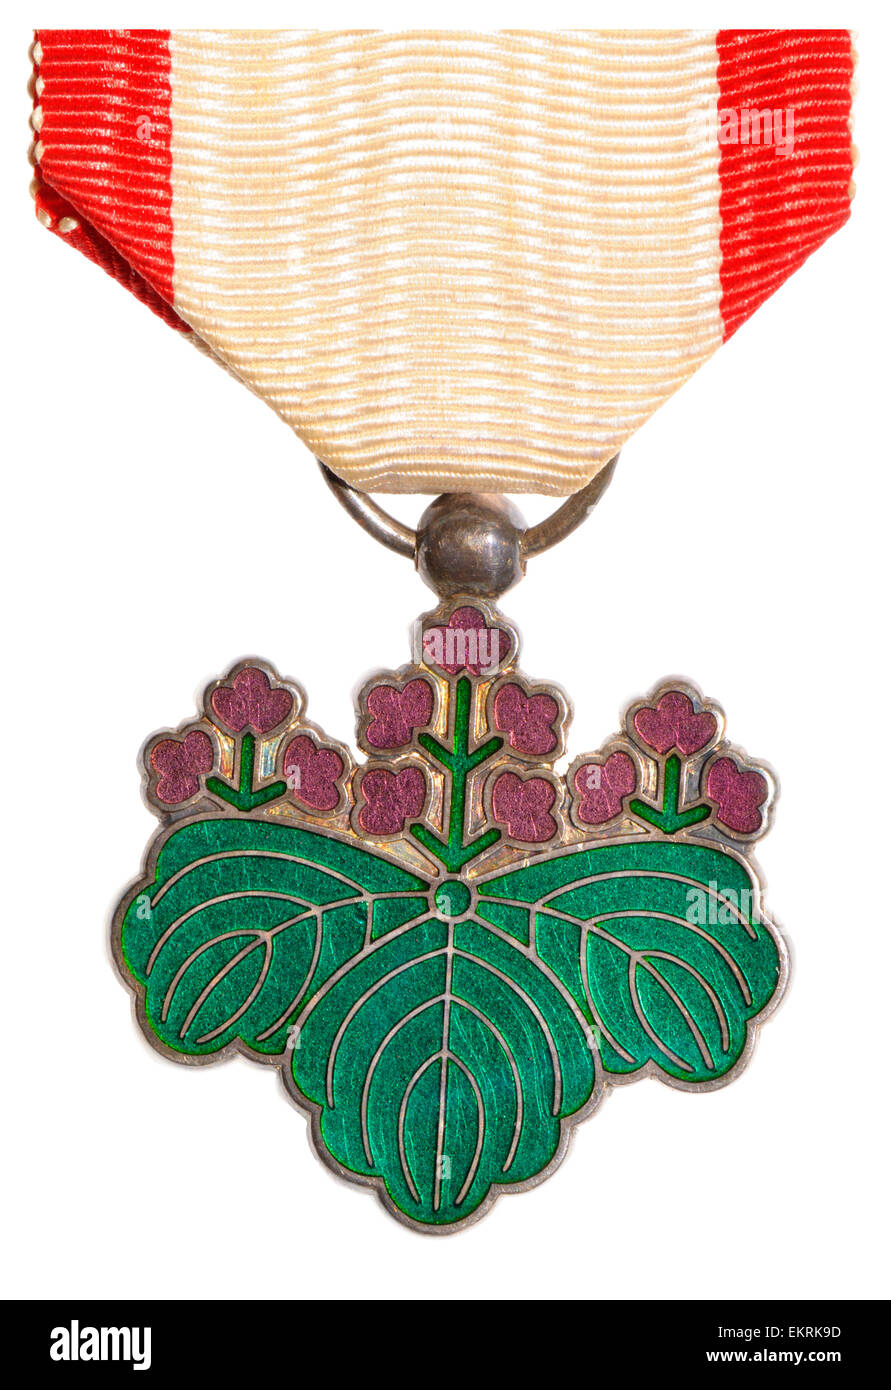 Japanese Medal: Order of the Rising Sun (7th class) Stock Photo